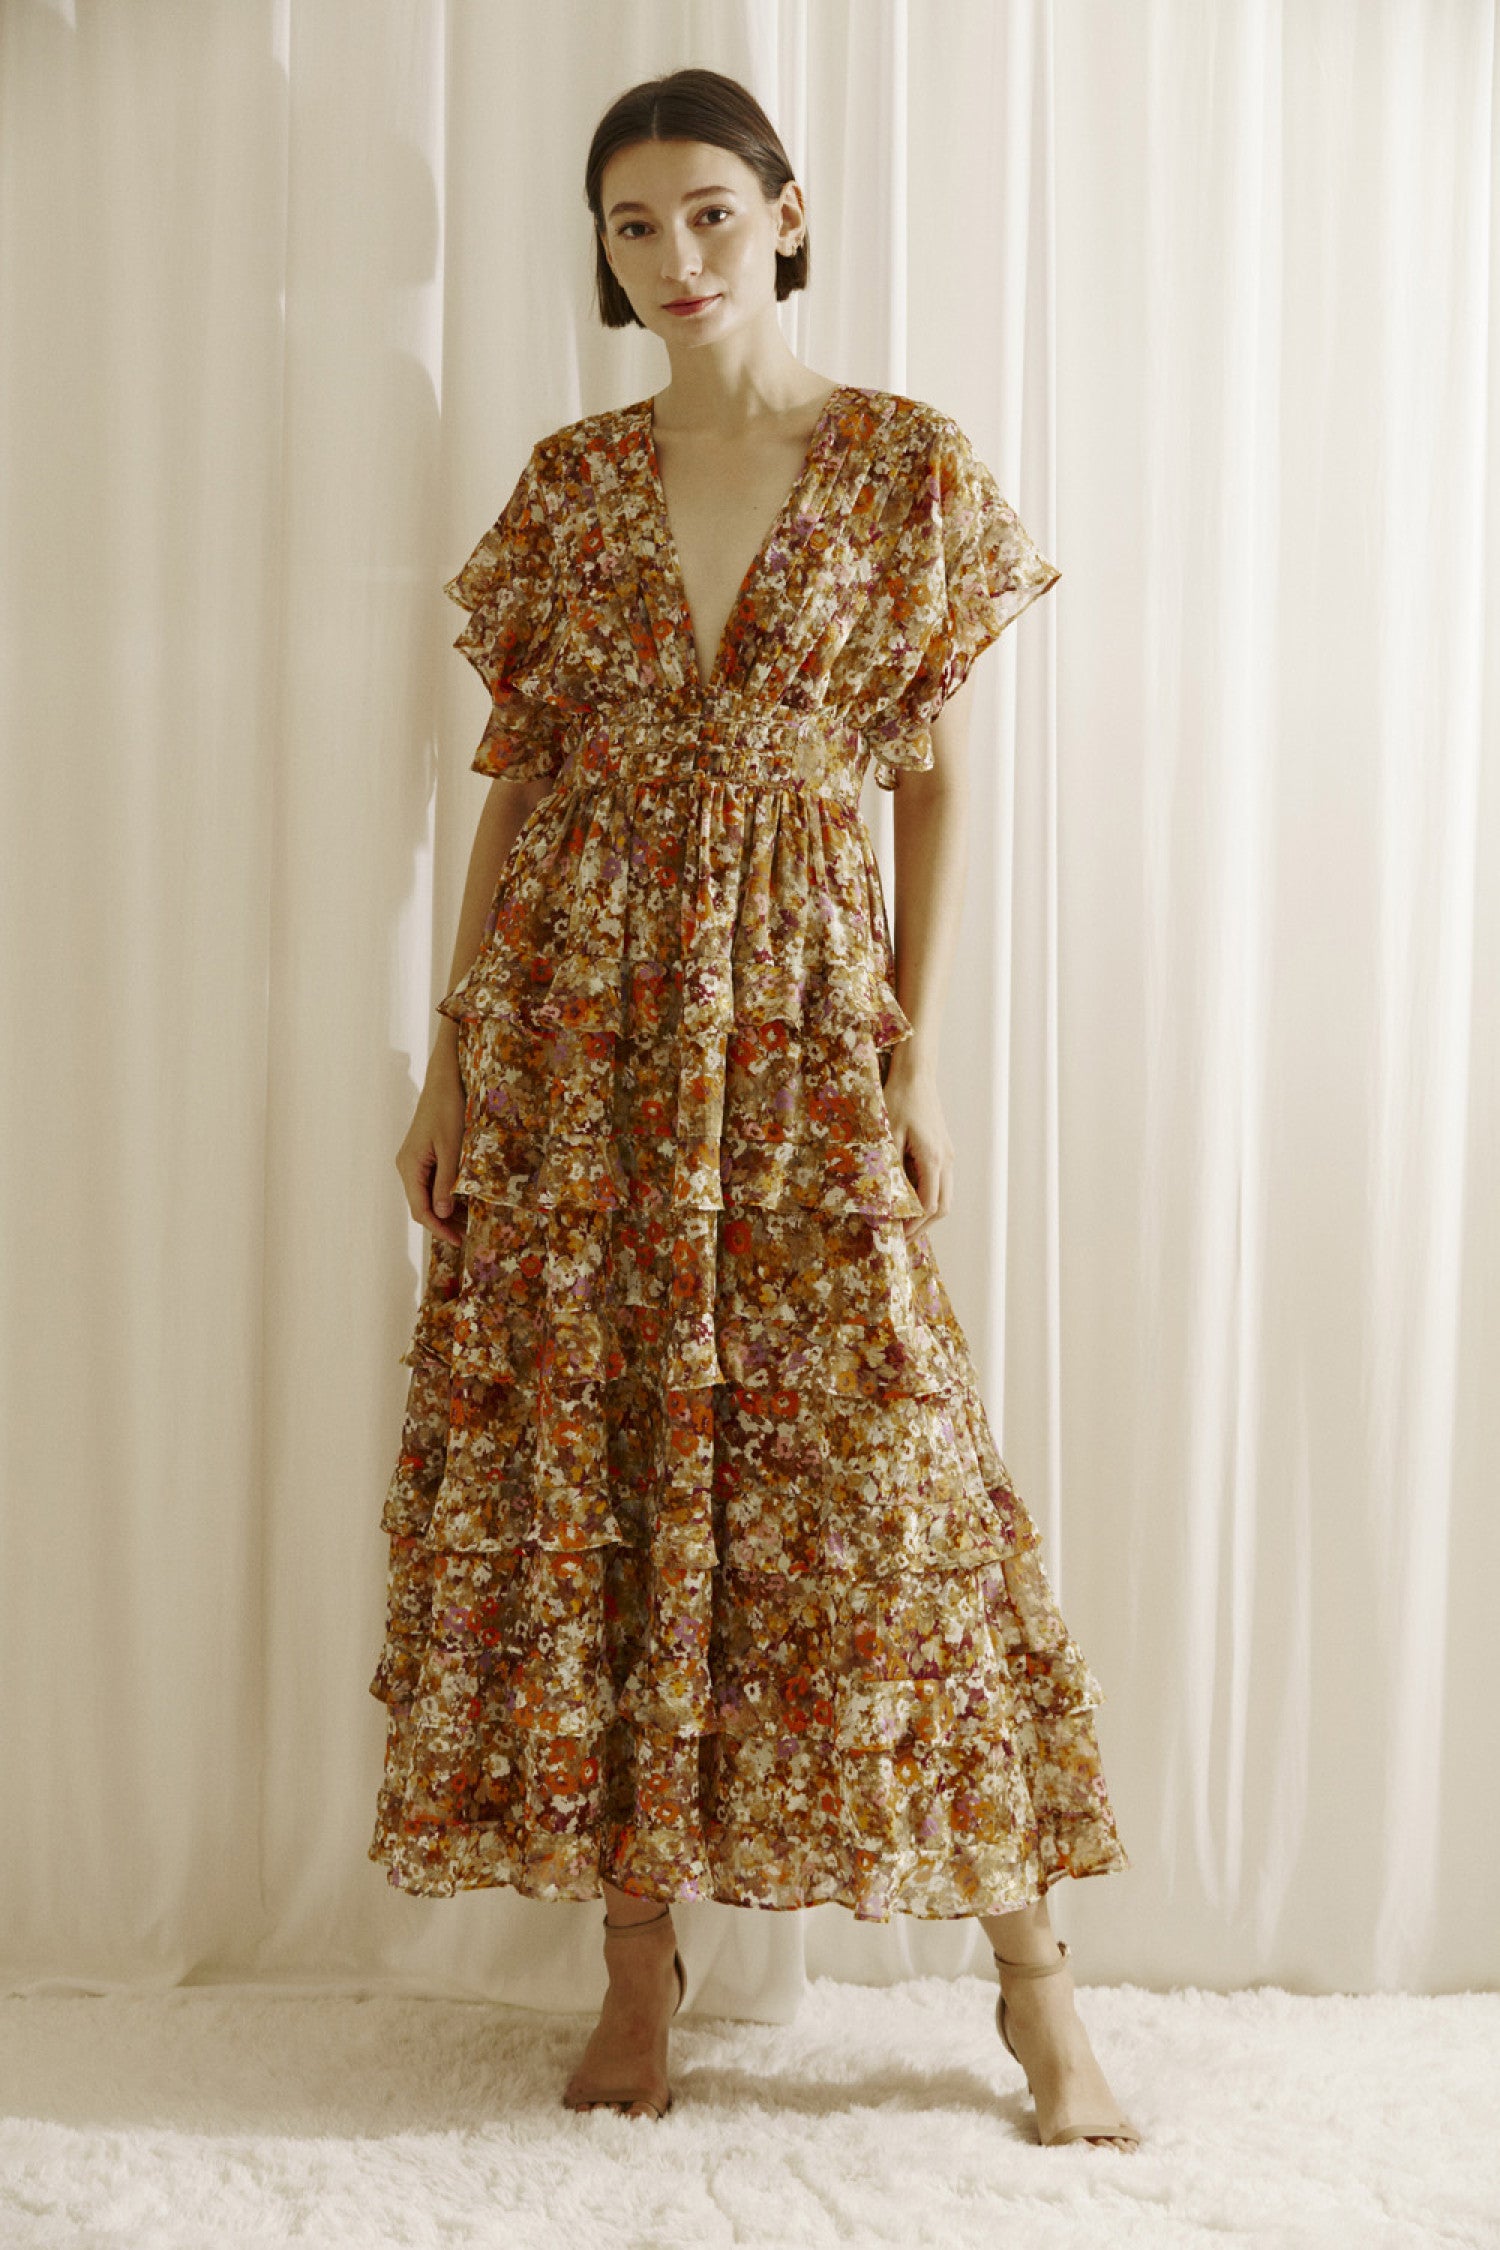 Ditsy floral print midi dress multicolor. Prominent browns, oranges, purples, and maroons.  It shows a deep v-neckline, short fluttered, ruffled sleeves, and a cinched empire waist with center buttons. It also has a ruffled, tiered layered, midi bottom and an open back with a crisscross back tie..  Front full view.